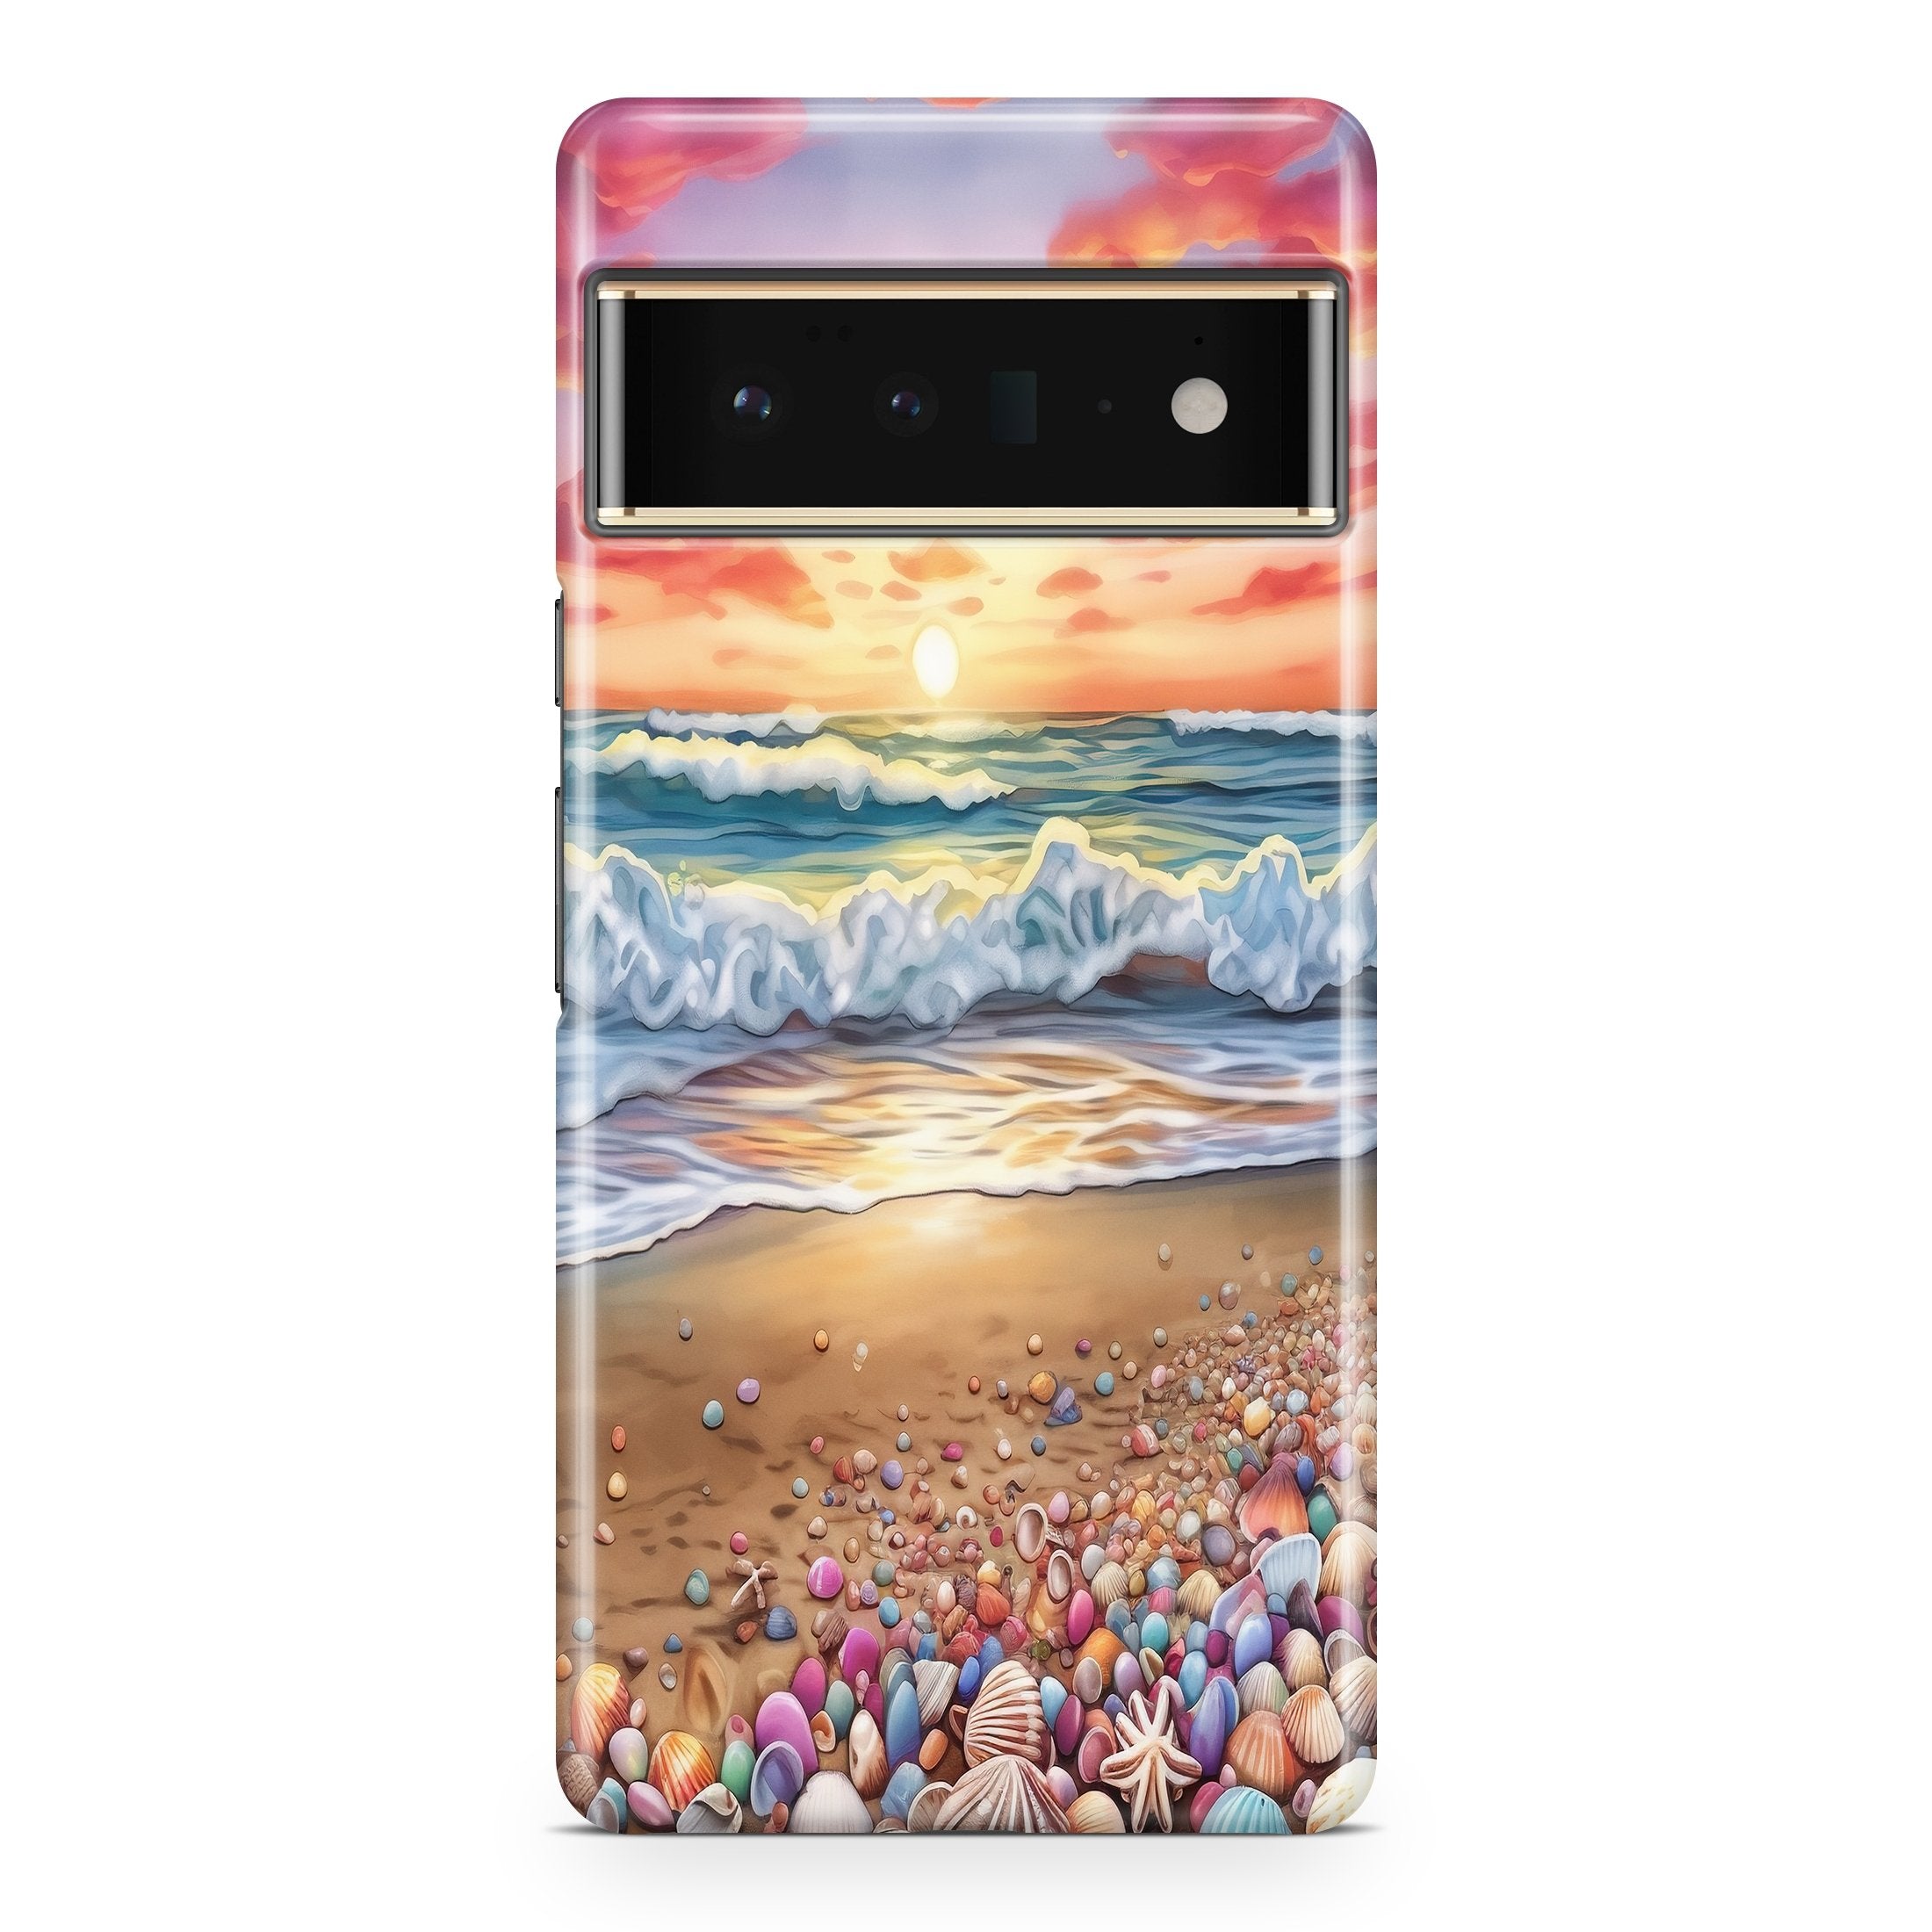 Summertime Shoreline - Google phone case designs by CaseSwagger